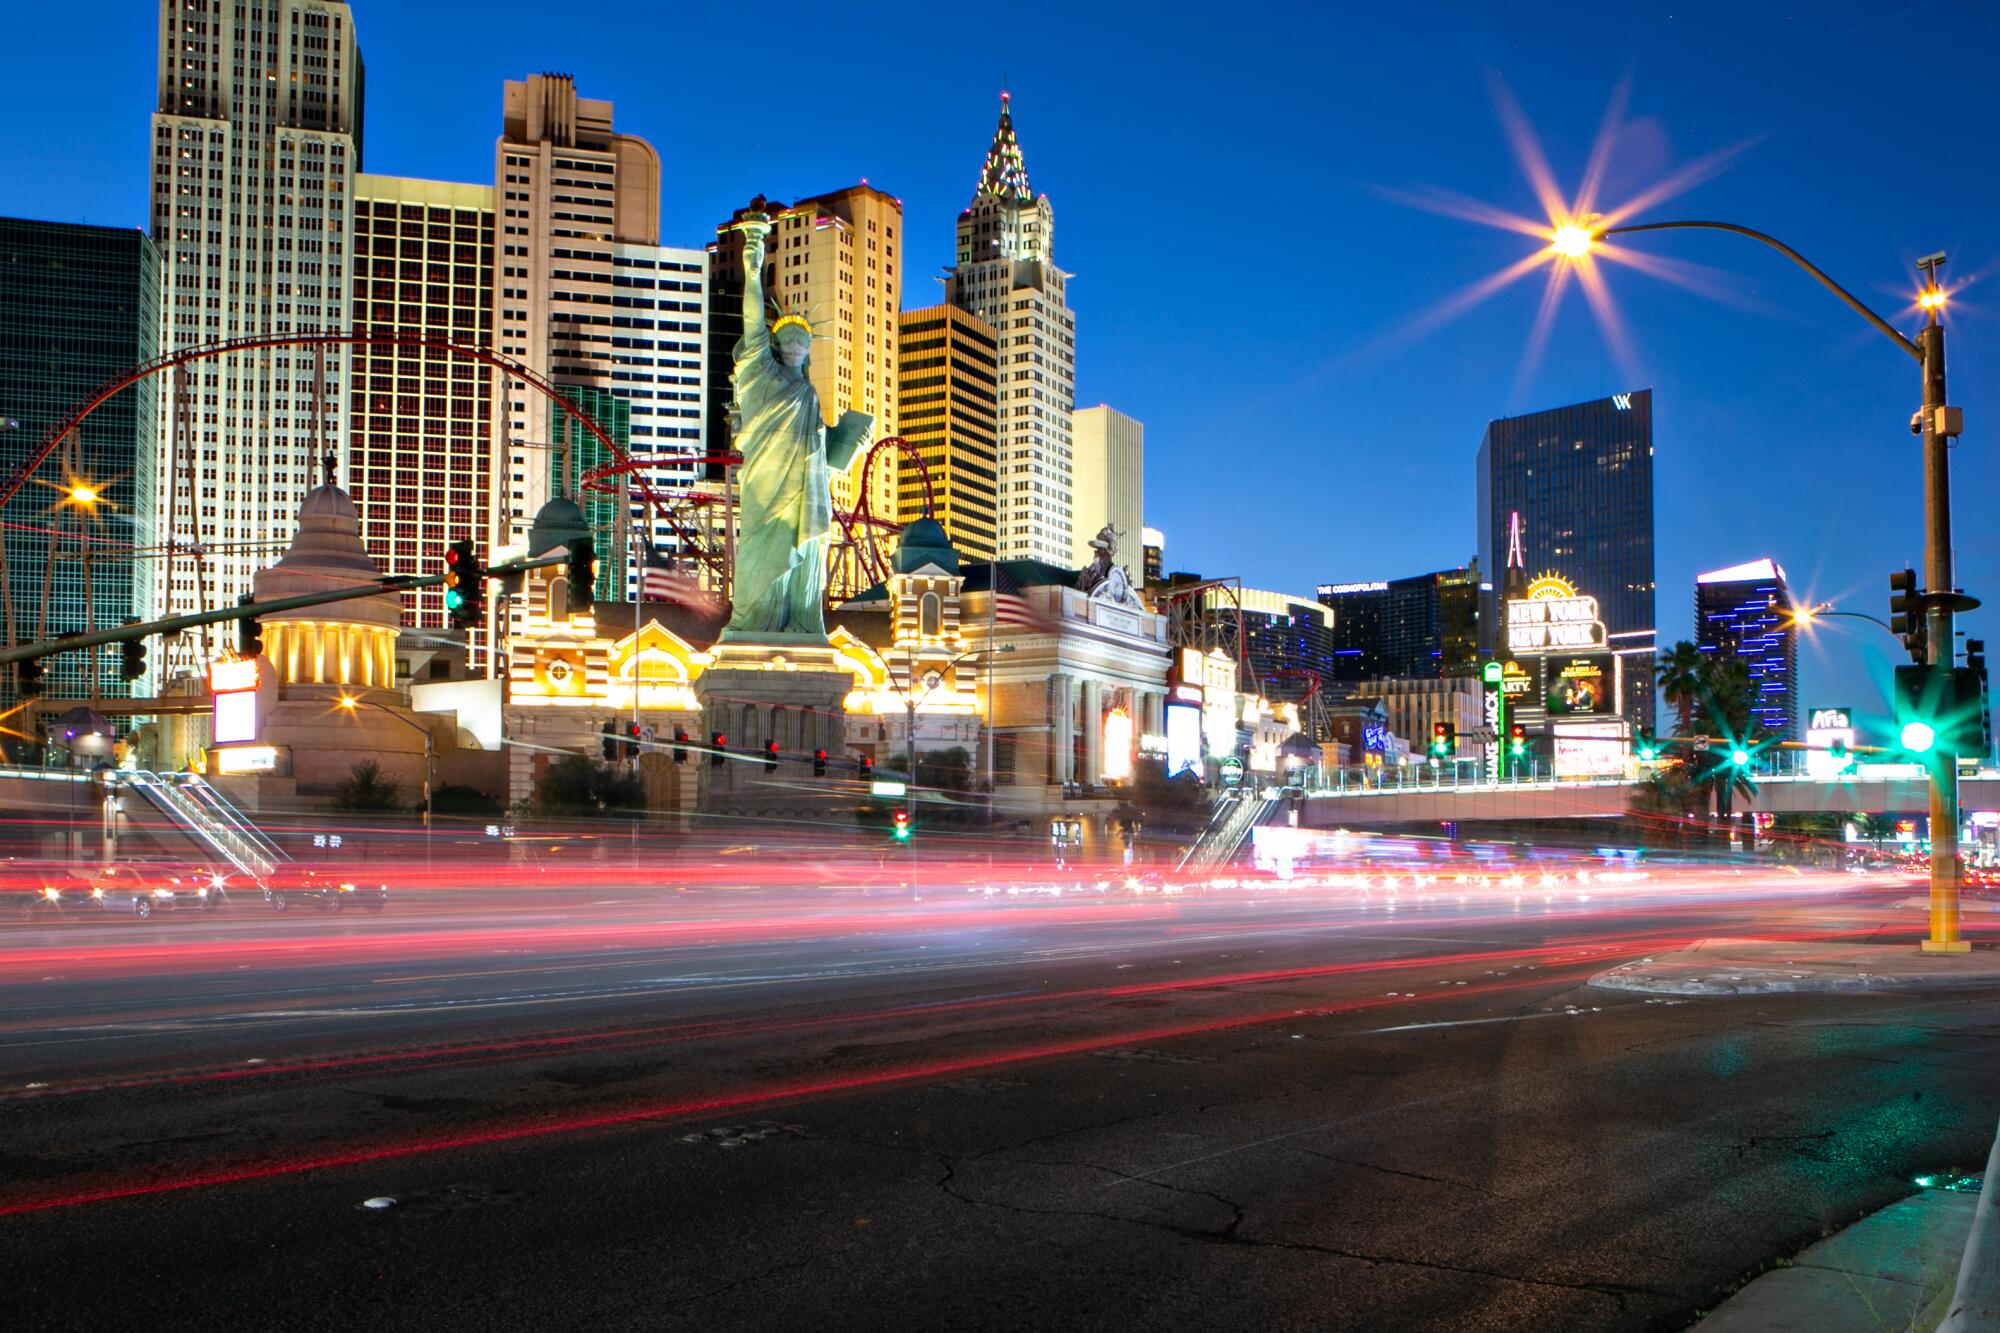 A view of the Las Vegas Strip with blurred headlights from passing cars.